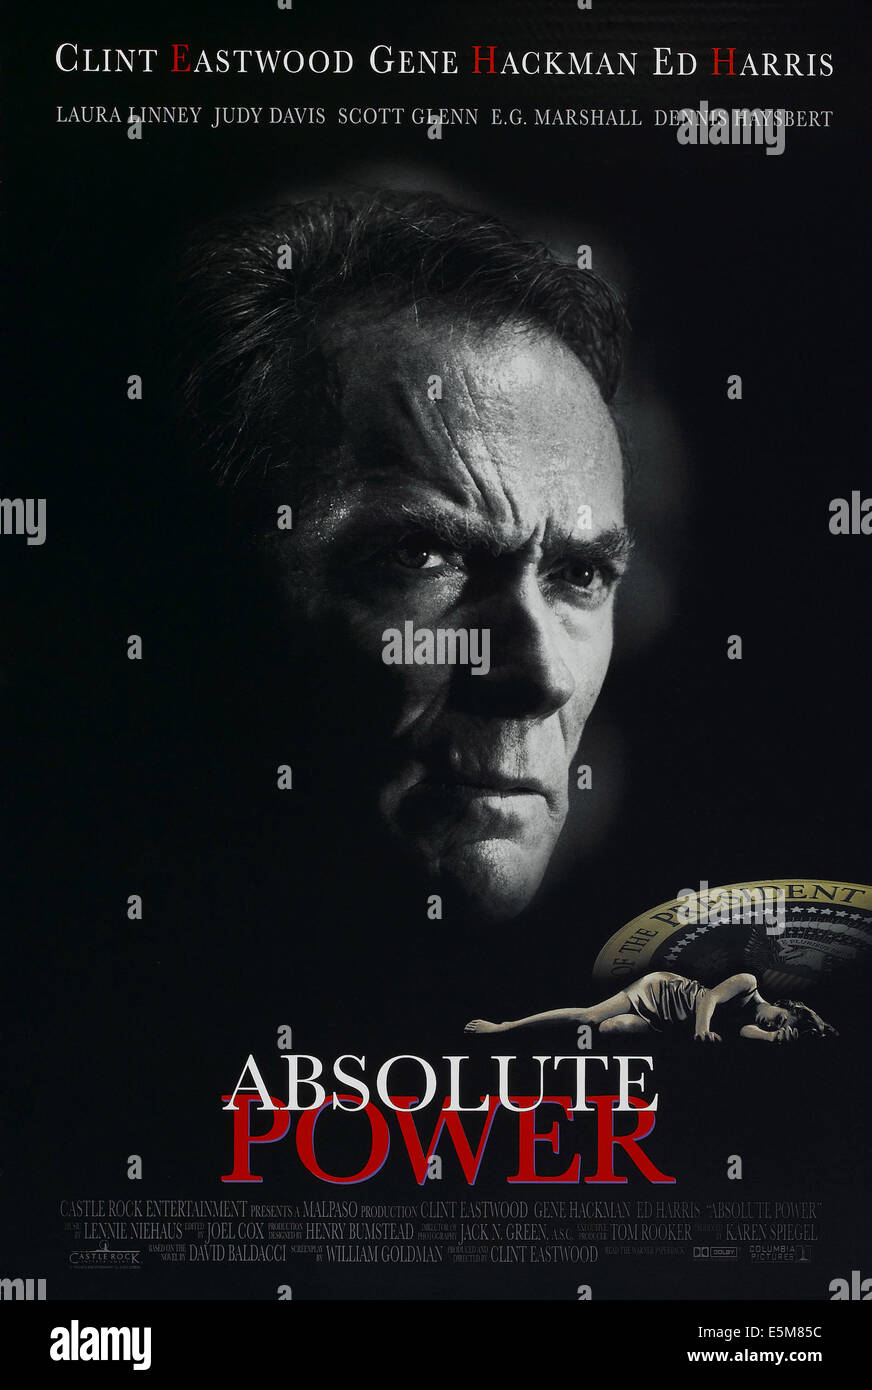 ABSOLUTE POWER, US advance poster art, Clint Eastwood, 1997. ©Columbia Pictures/courtesy Everett Collection Stock Photo